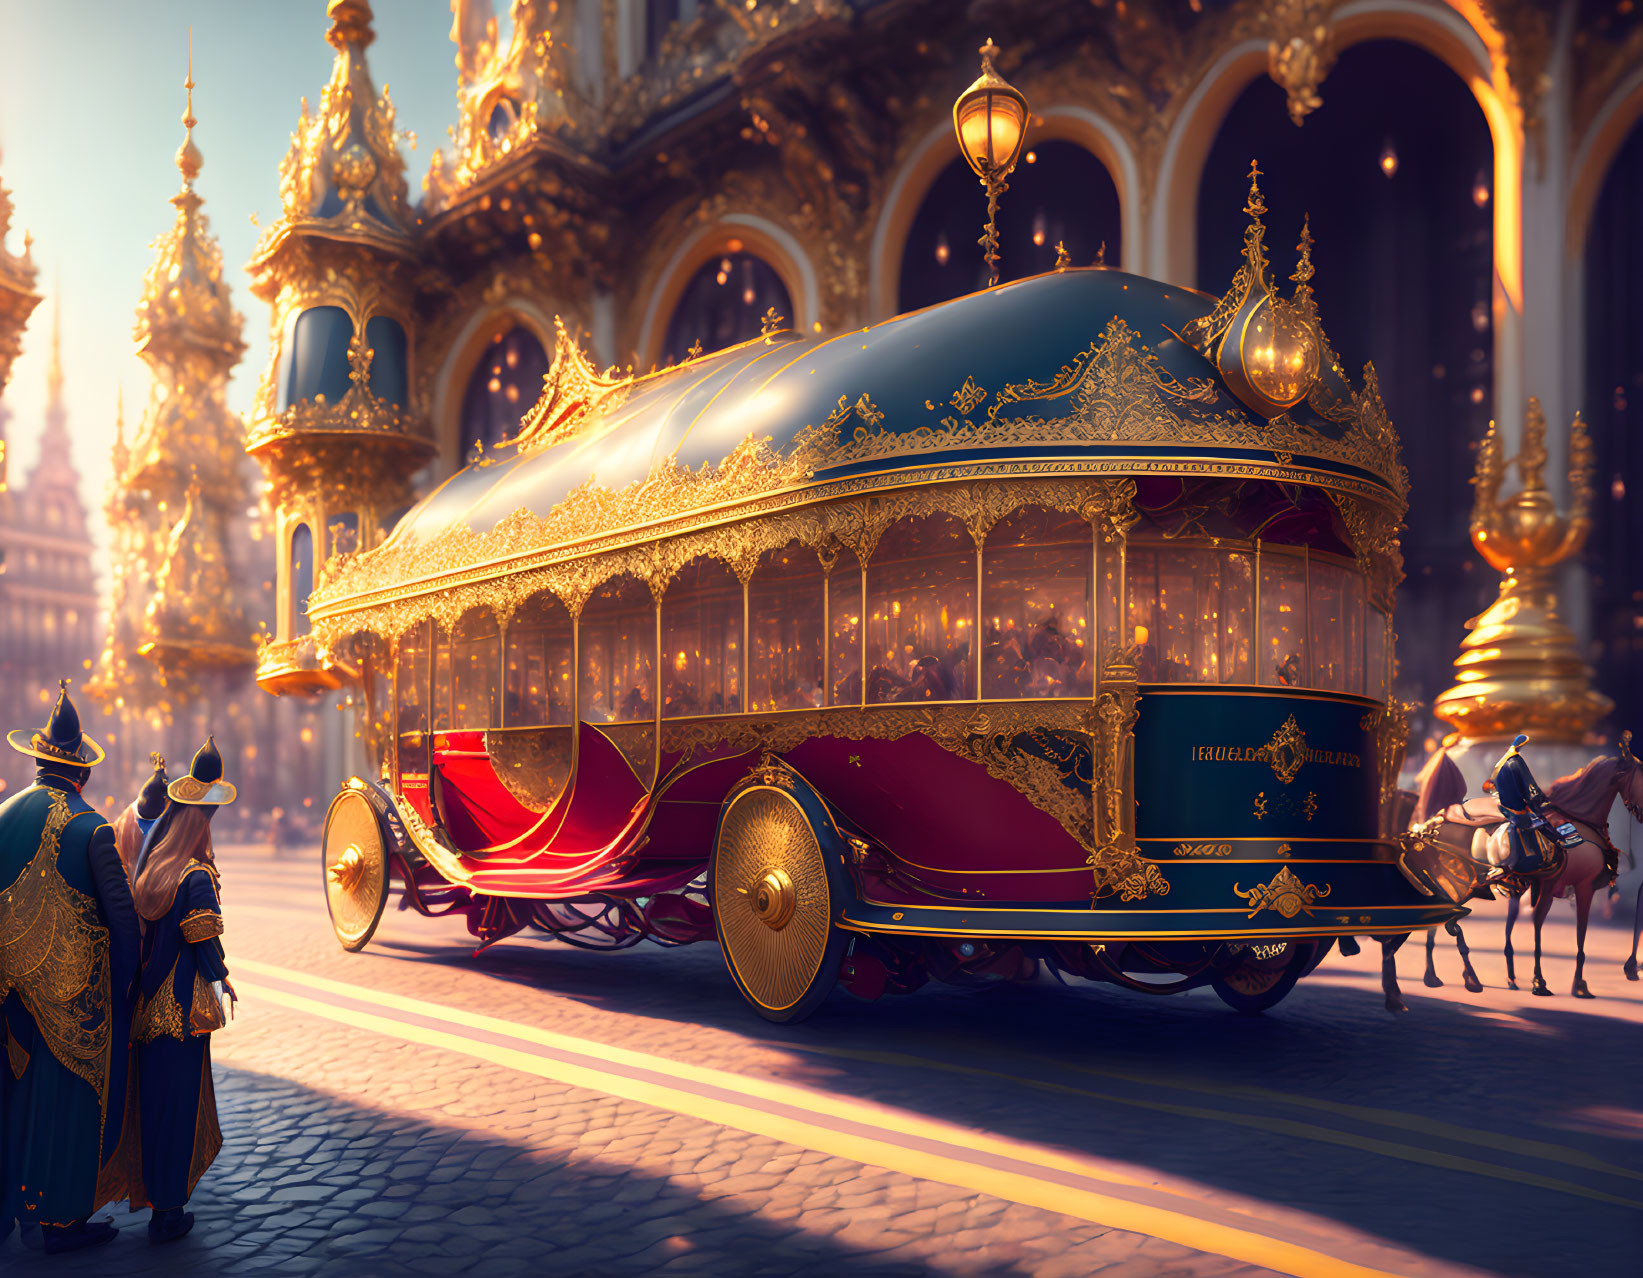 Golden-trimmed red carriage surrounded by ornate architecture and onlookers